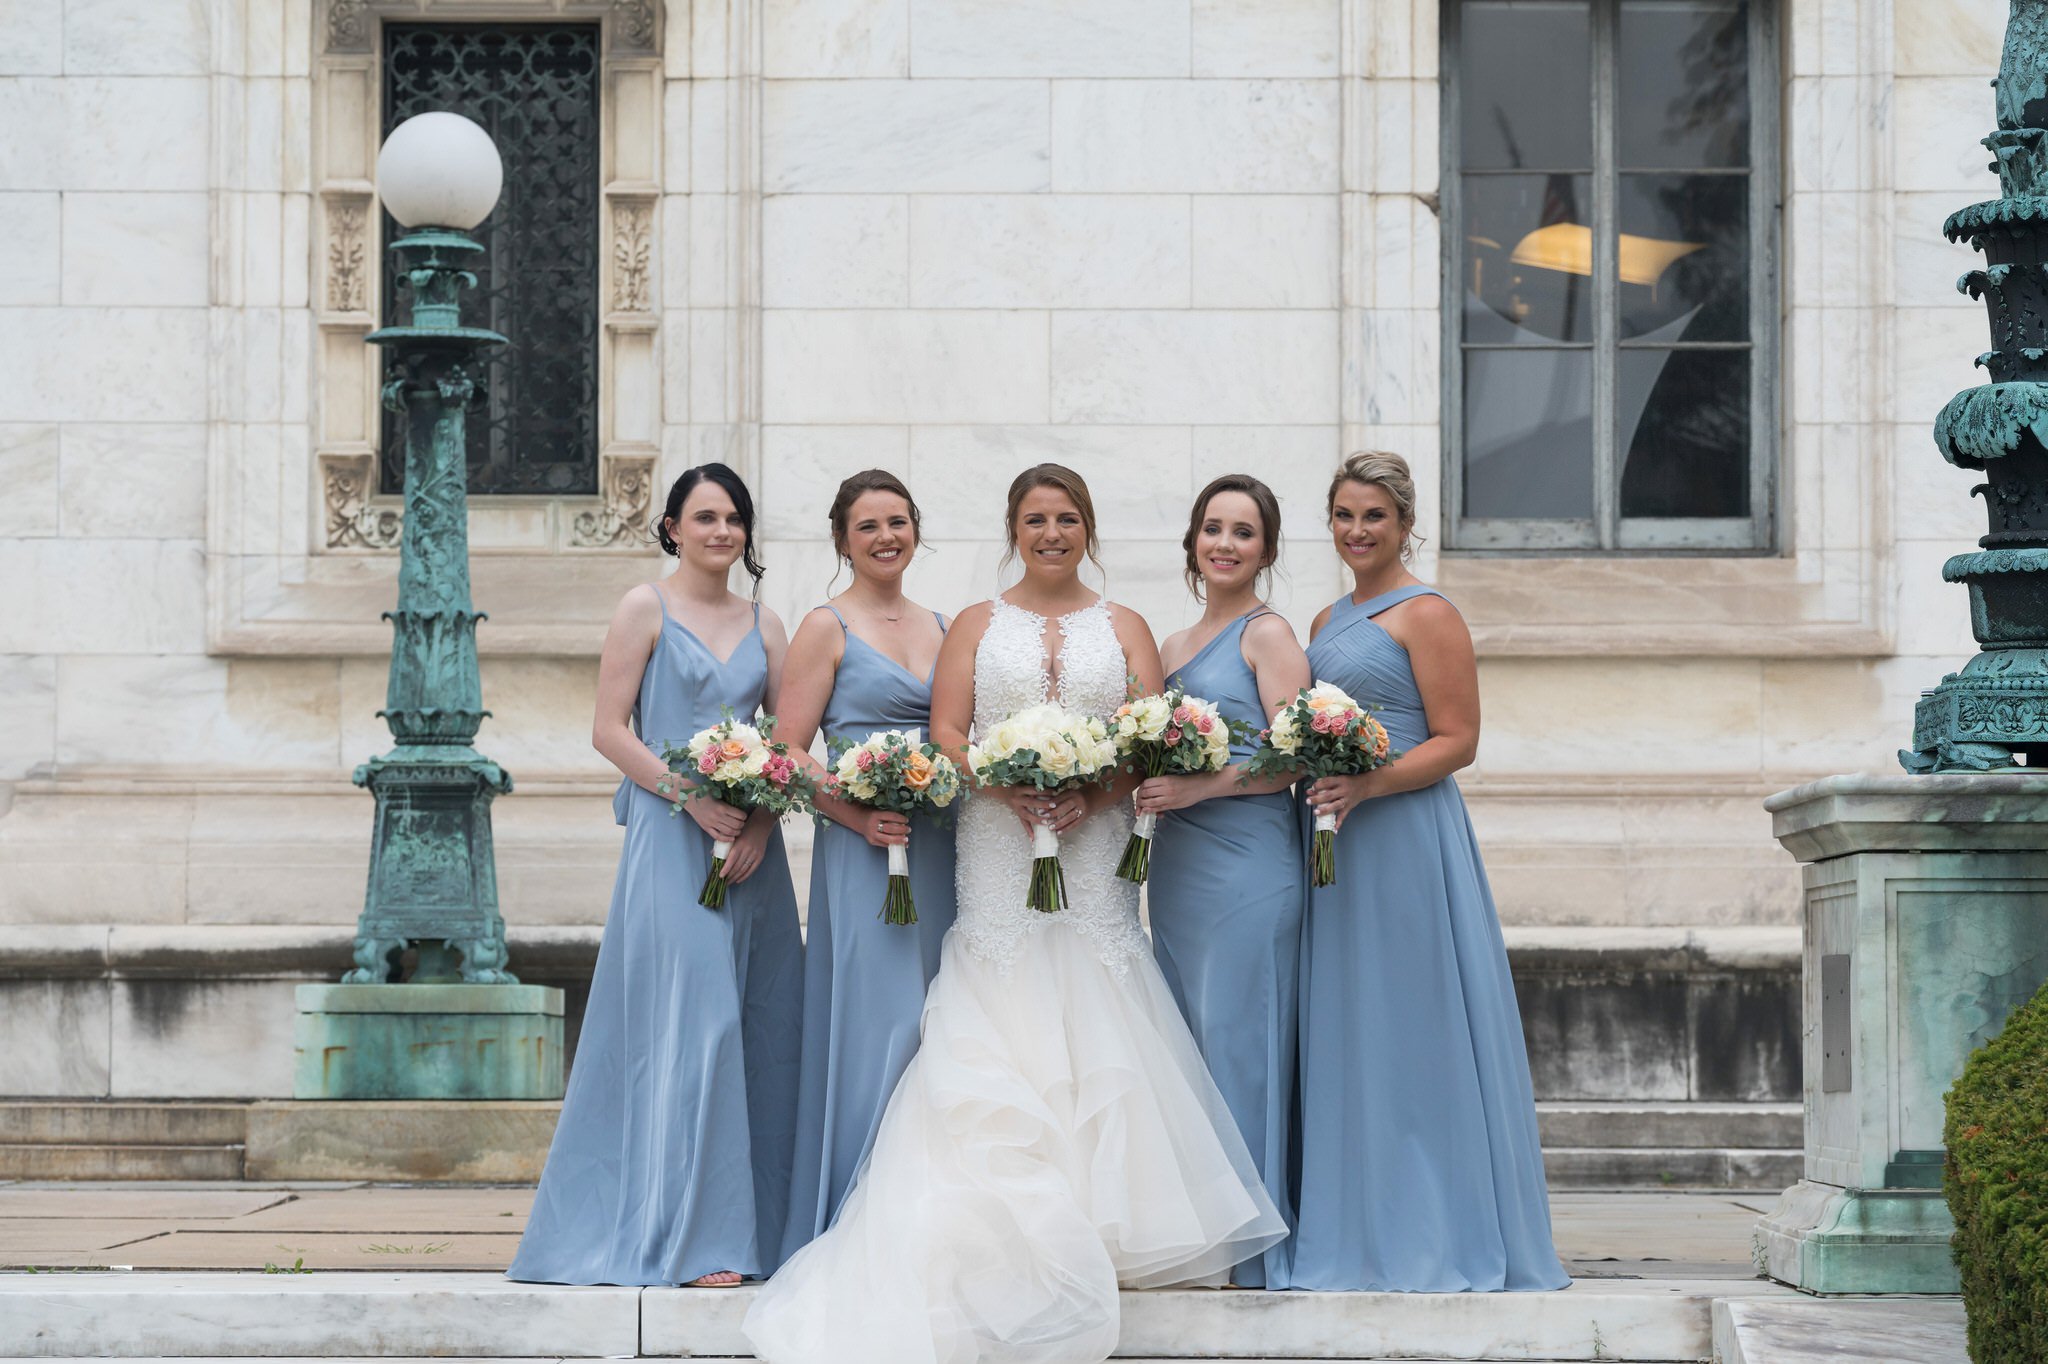 Bridesmaids, wearing pastel blue dresses, pose for formals at Detroit Public LIbrary.